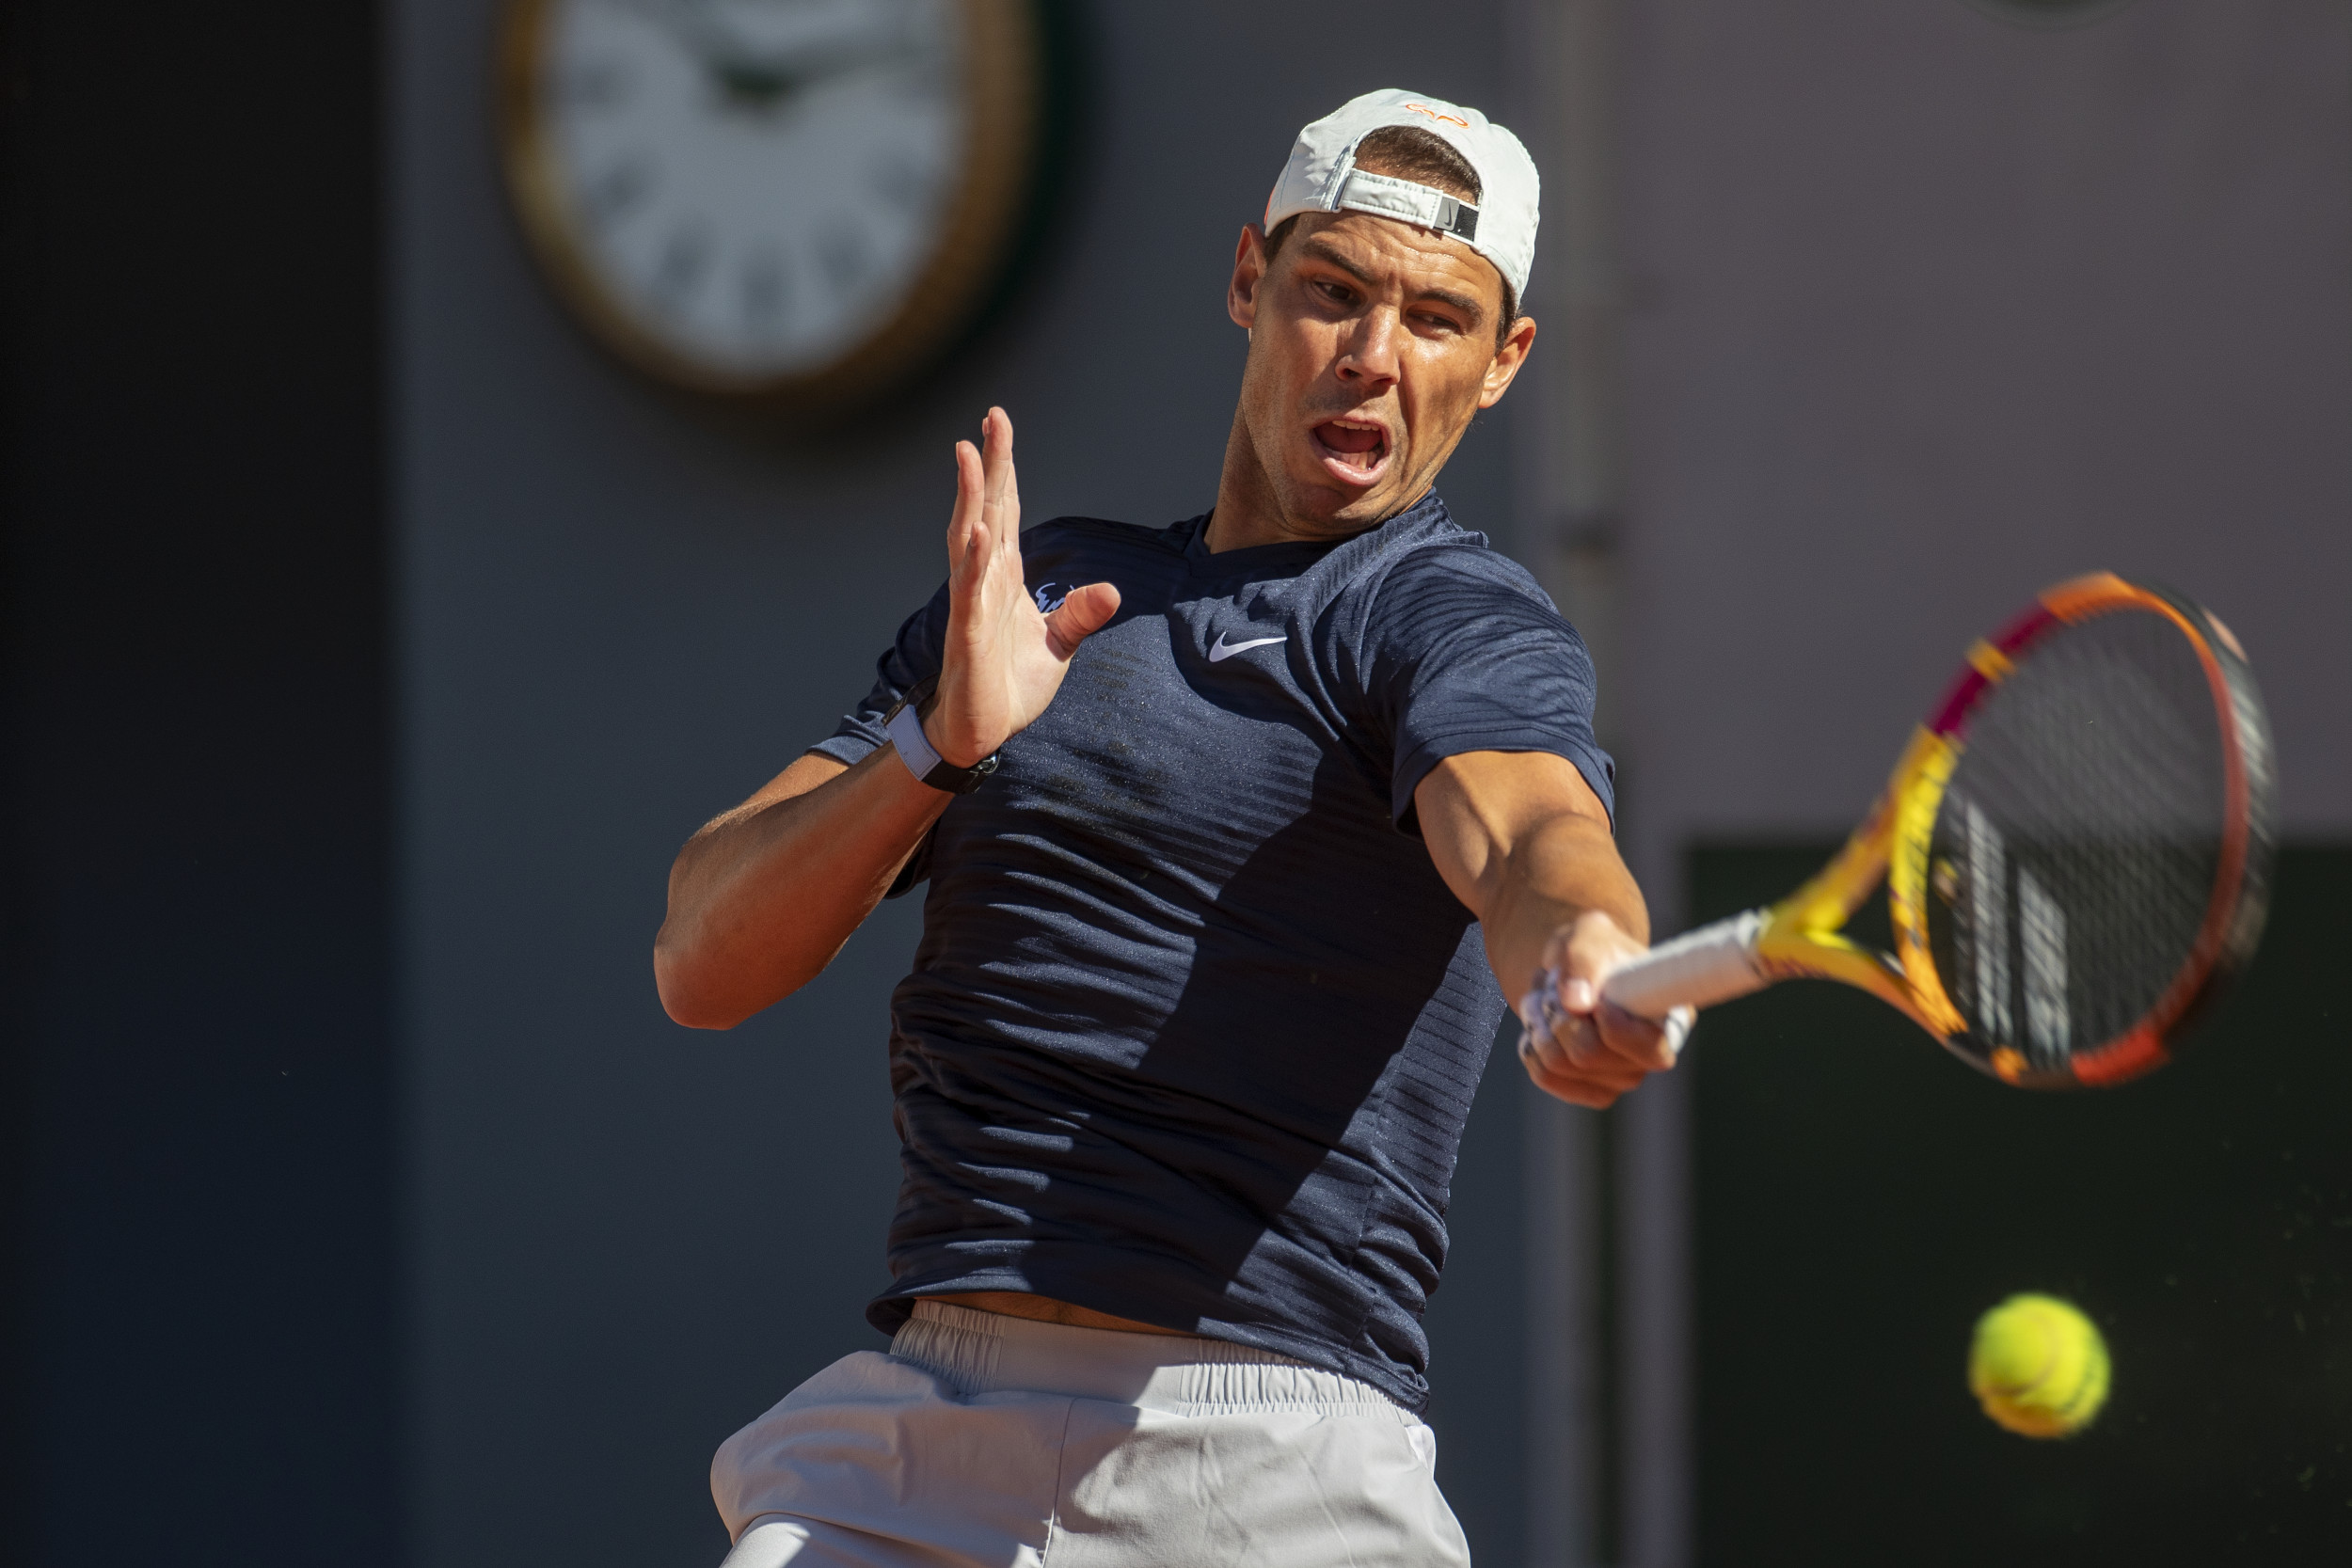 French Open Tennis 2021 How To Watch Federer And Nadal First Round Matches Schedule Live Stream